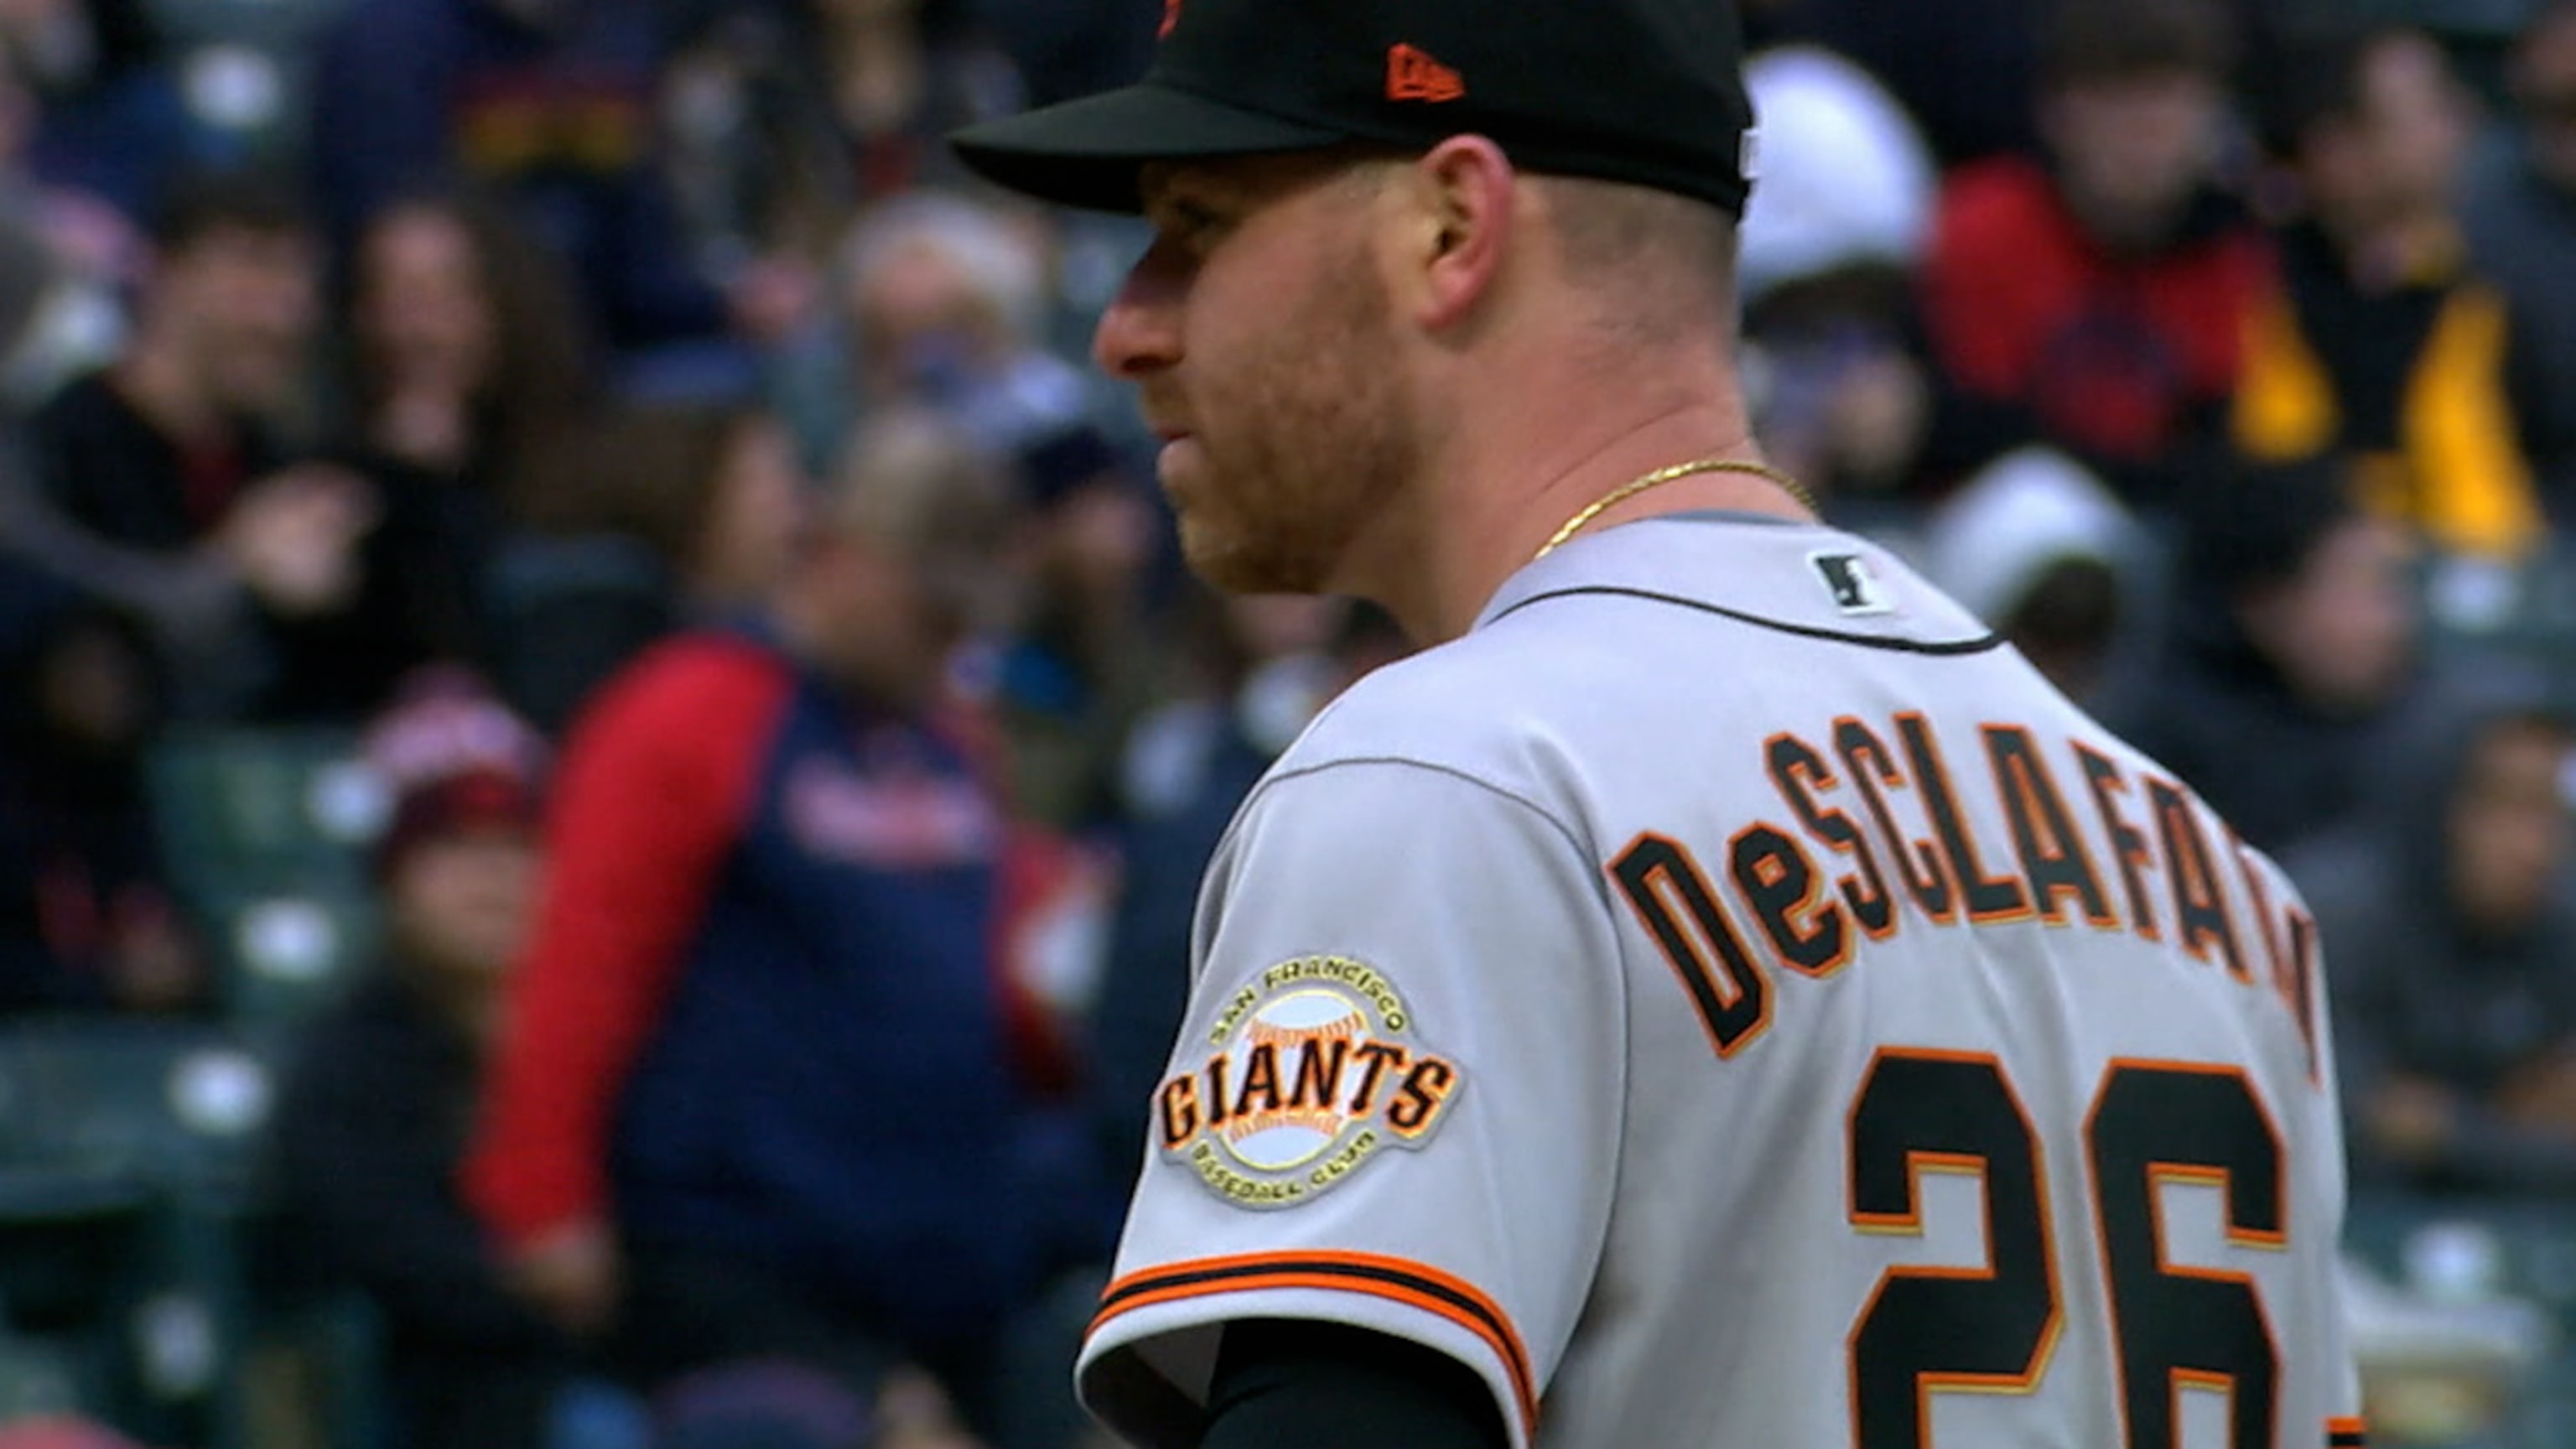 Anthony DeSclafani pitched well, 'just got beat' early, Gabe Kapler states  – NBC Sports Bay Area & California